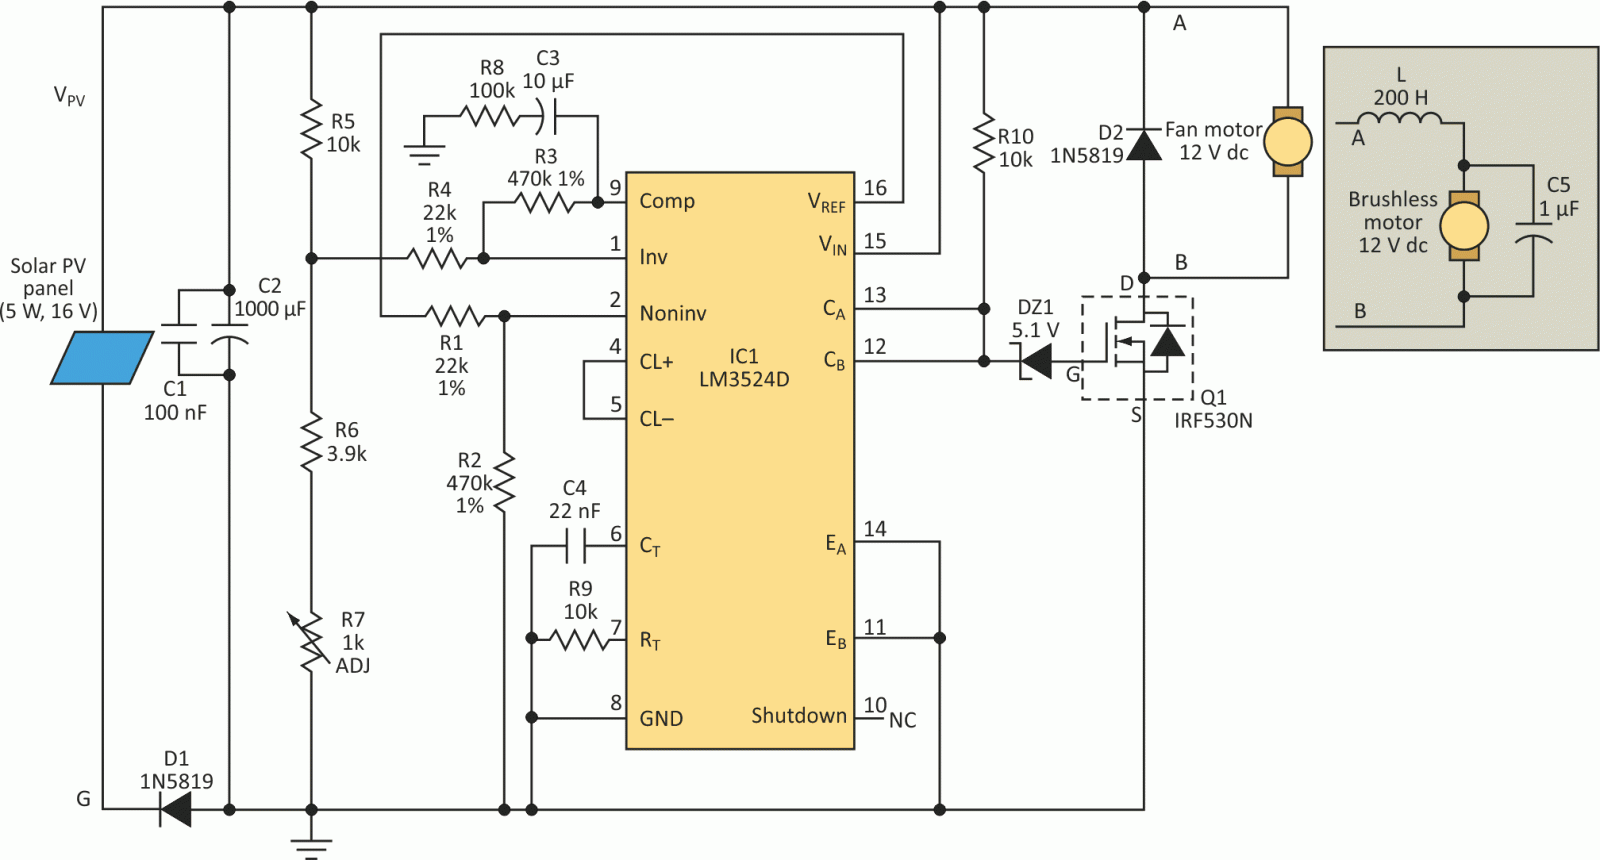 A regulating pulse-width modulator chip that regulates the input voltage rather than the output voltage is the core of the maximum power tracker implementation.